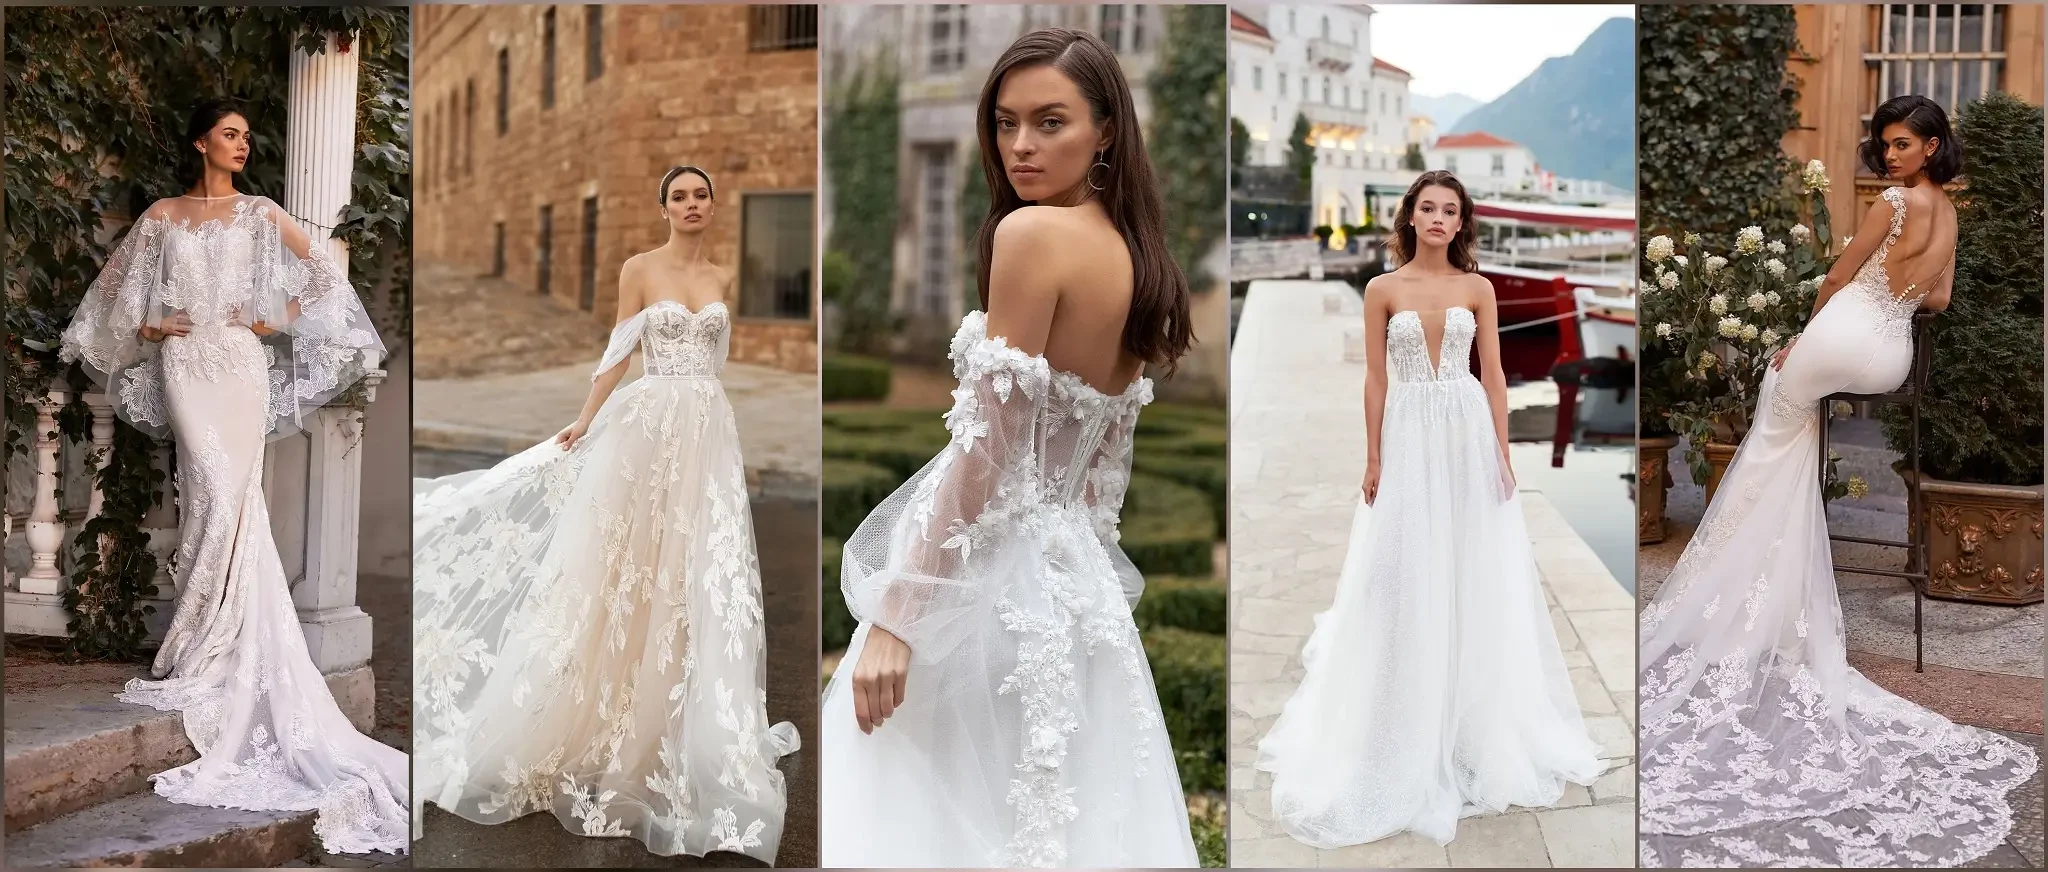 Choosing the right length of a wedding dress: from mini to long train 